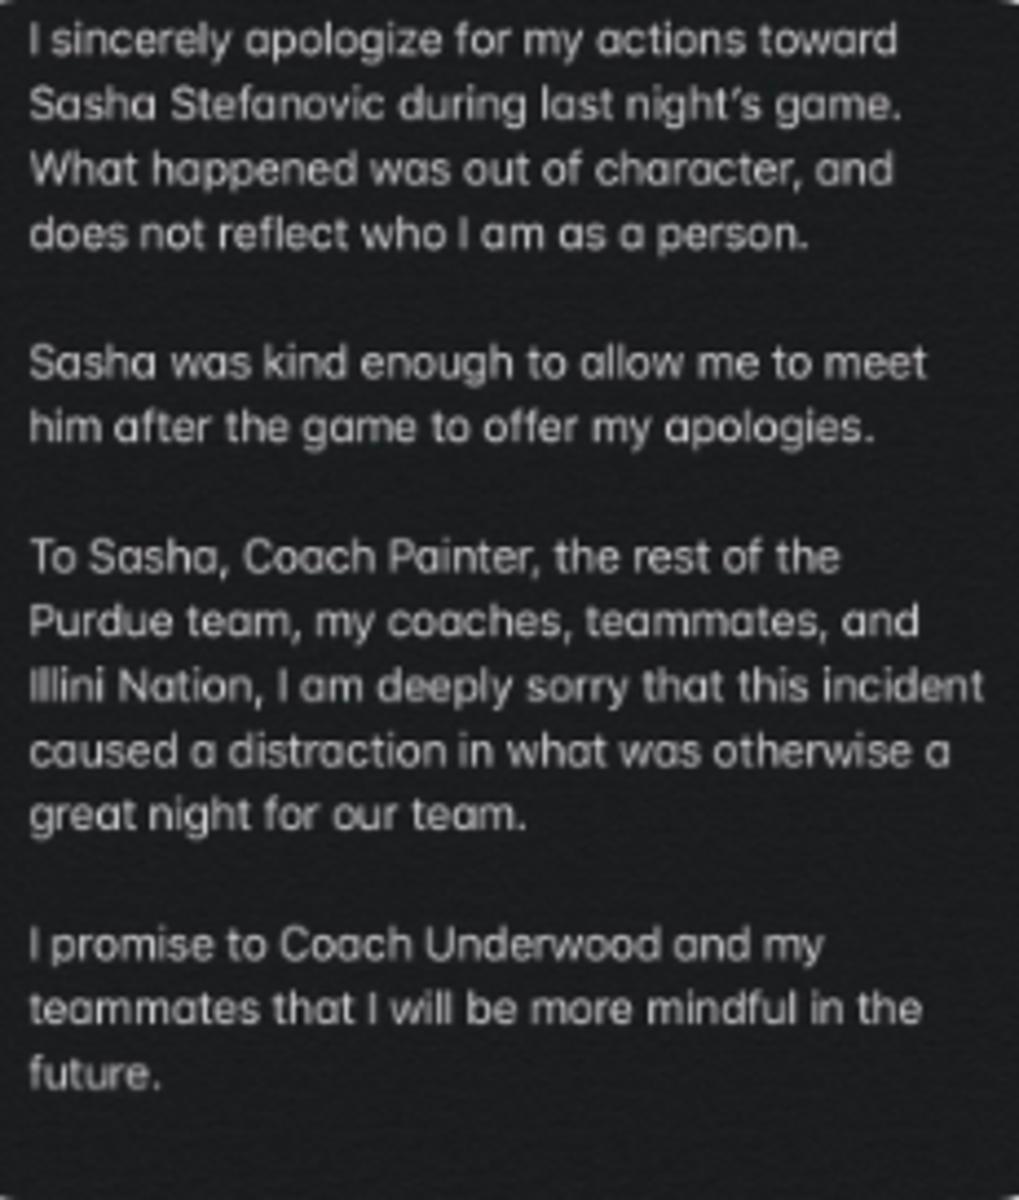 Illinois guard Alan Griffin issues statement of apology following his ejection from the game at Purdue on Jan. 21, 2020. Griffin was issued a Flagrant 2 foul after intentionally stepping on Purdue guard Sasha Stefanovic in the first half of the 79-62 win over the Boilermakers.